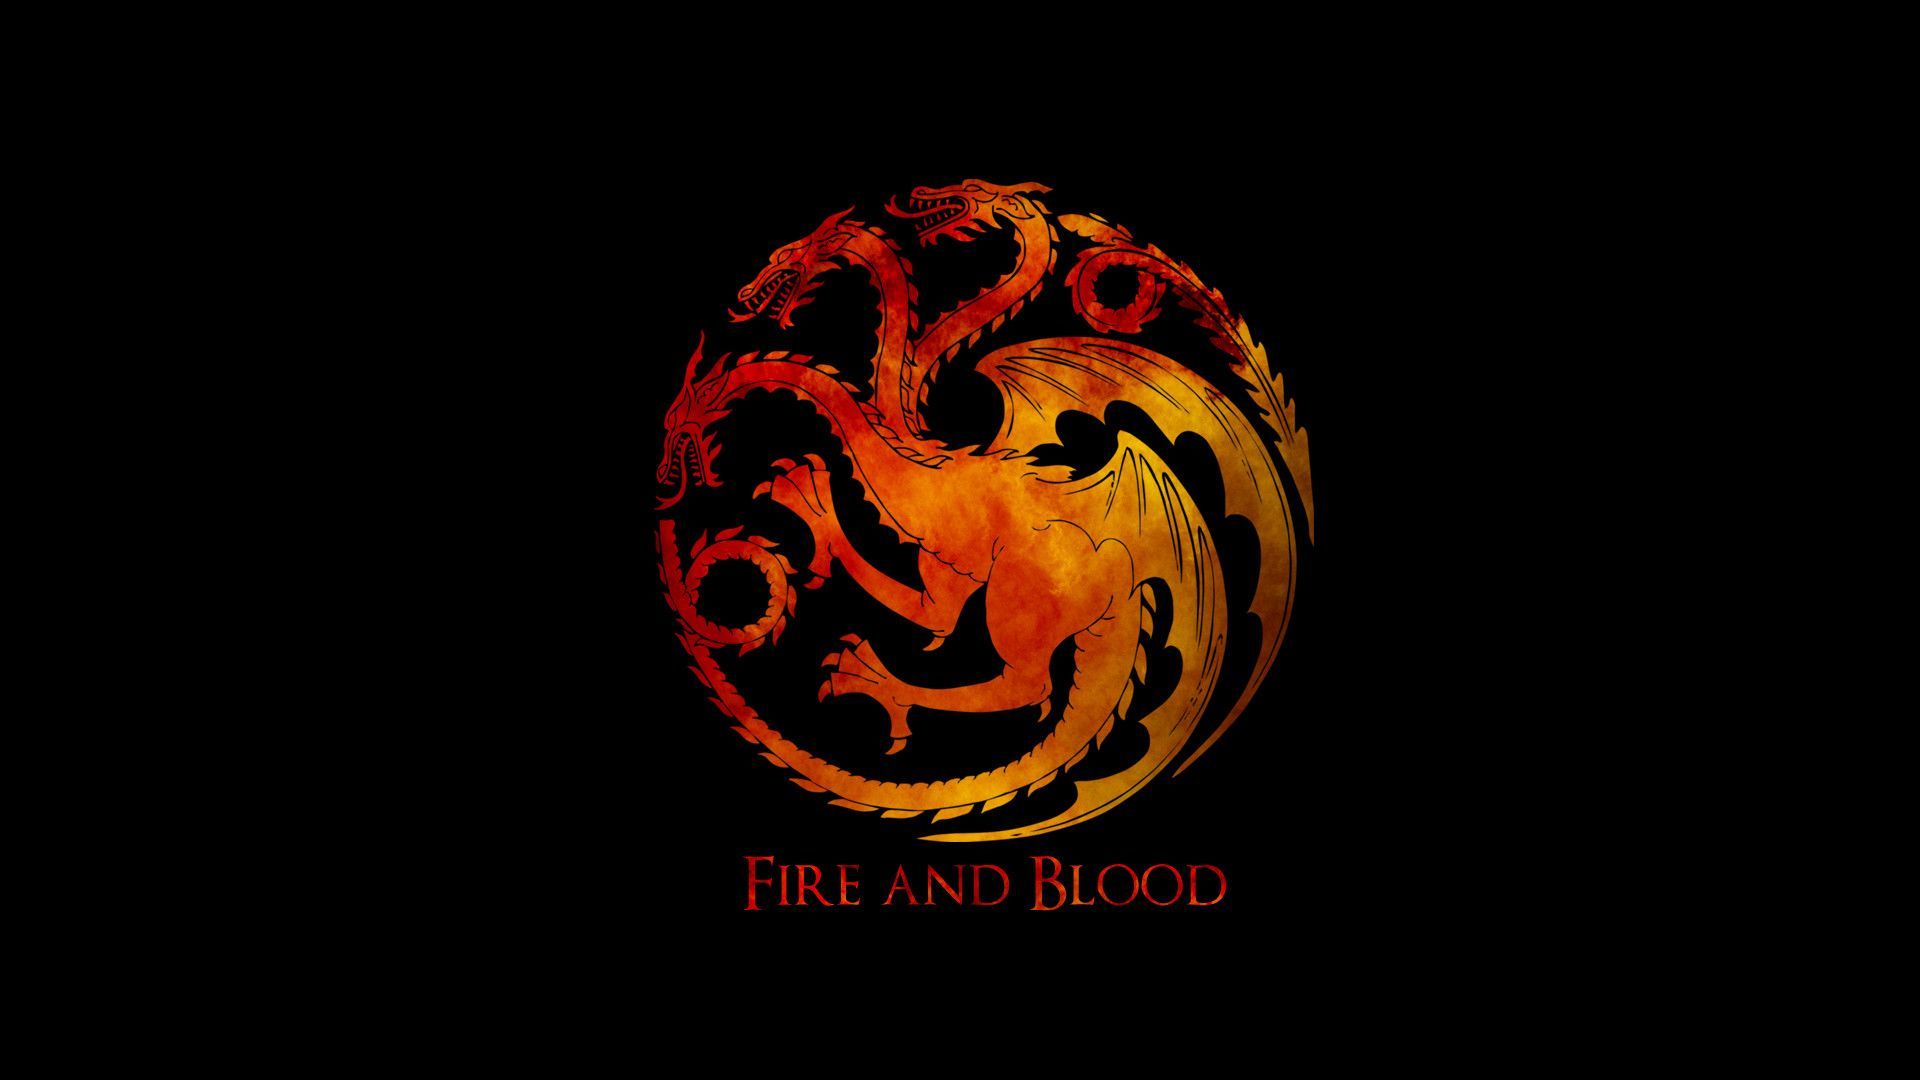 Fire and Blood Wallpaper Free Fire and Blood Background